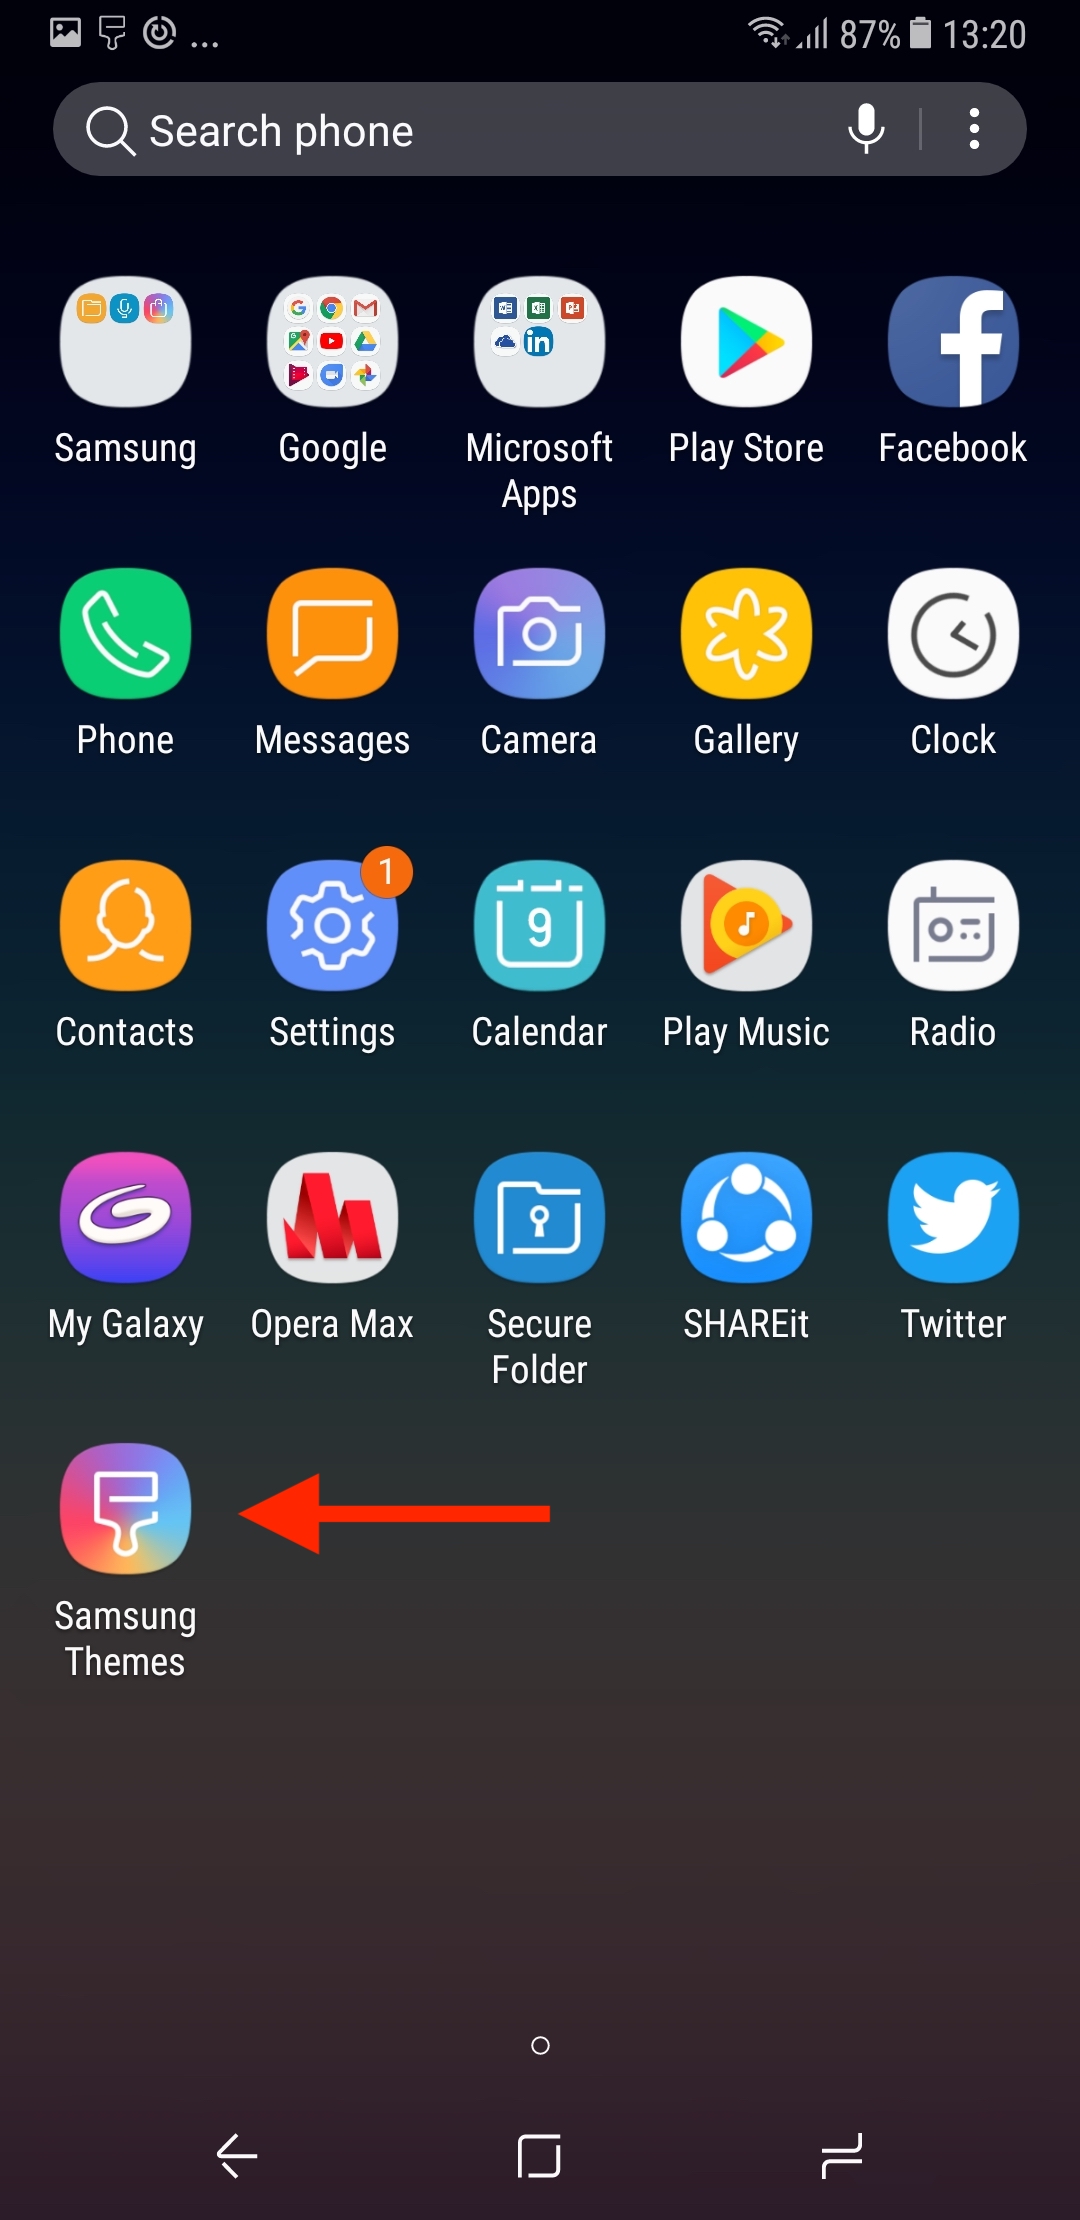 How to Add Samsung Themes shortcut to your home screen or app drawer